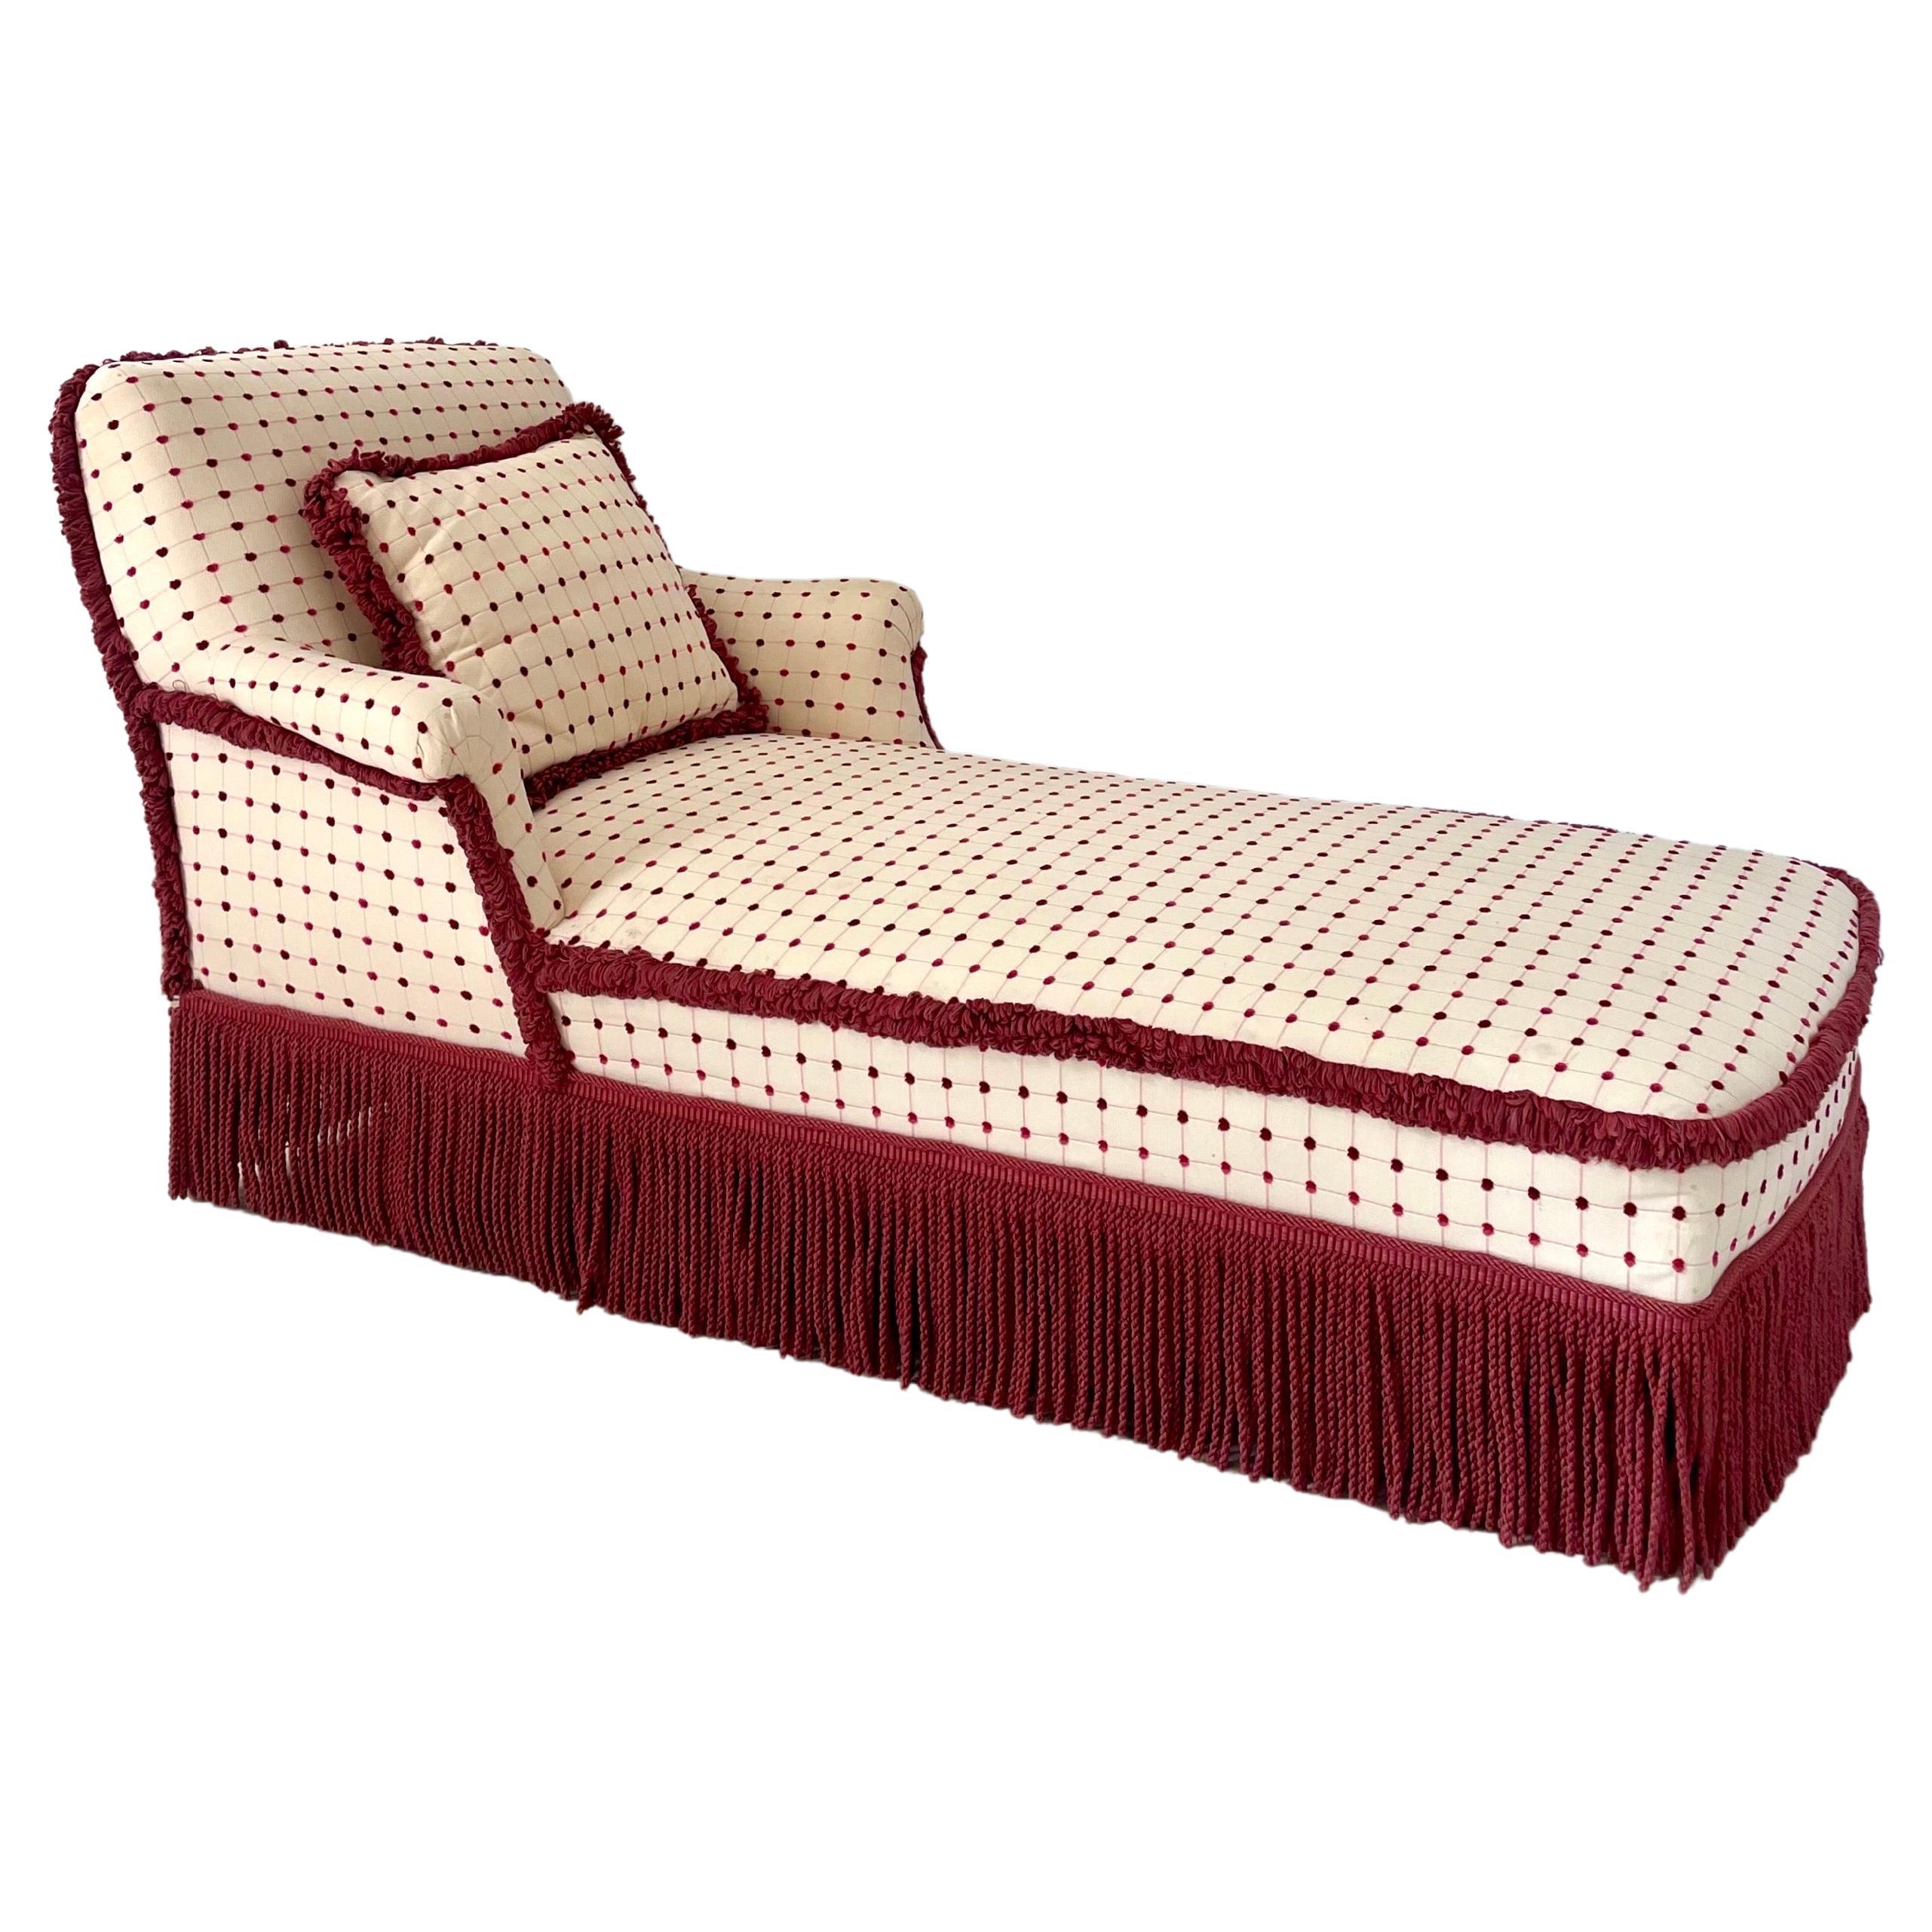 Beautiful Meridian - Day bed - Lounge chair - Bench with Burgundy, raspberry pink, off-white upholstery.
Magnificent meridian from the Napoleon III - Second Empire period with a wide backrest curved outwards giving a very comfortable